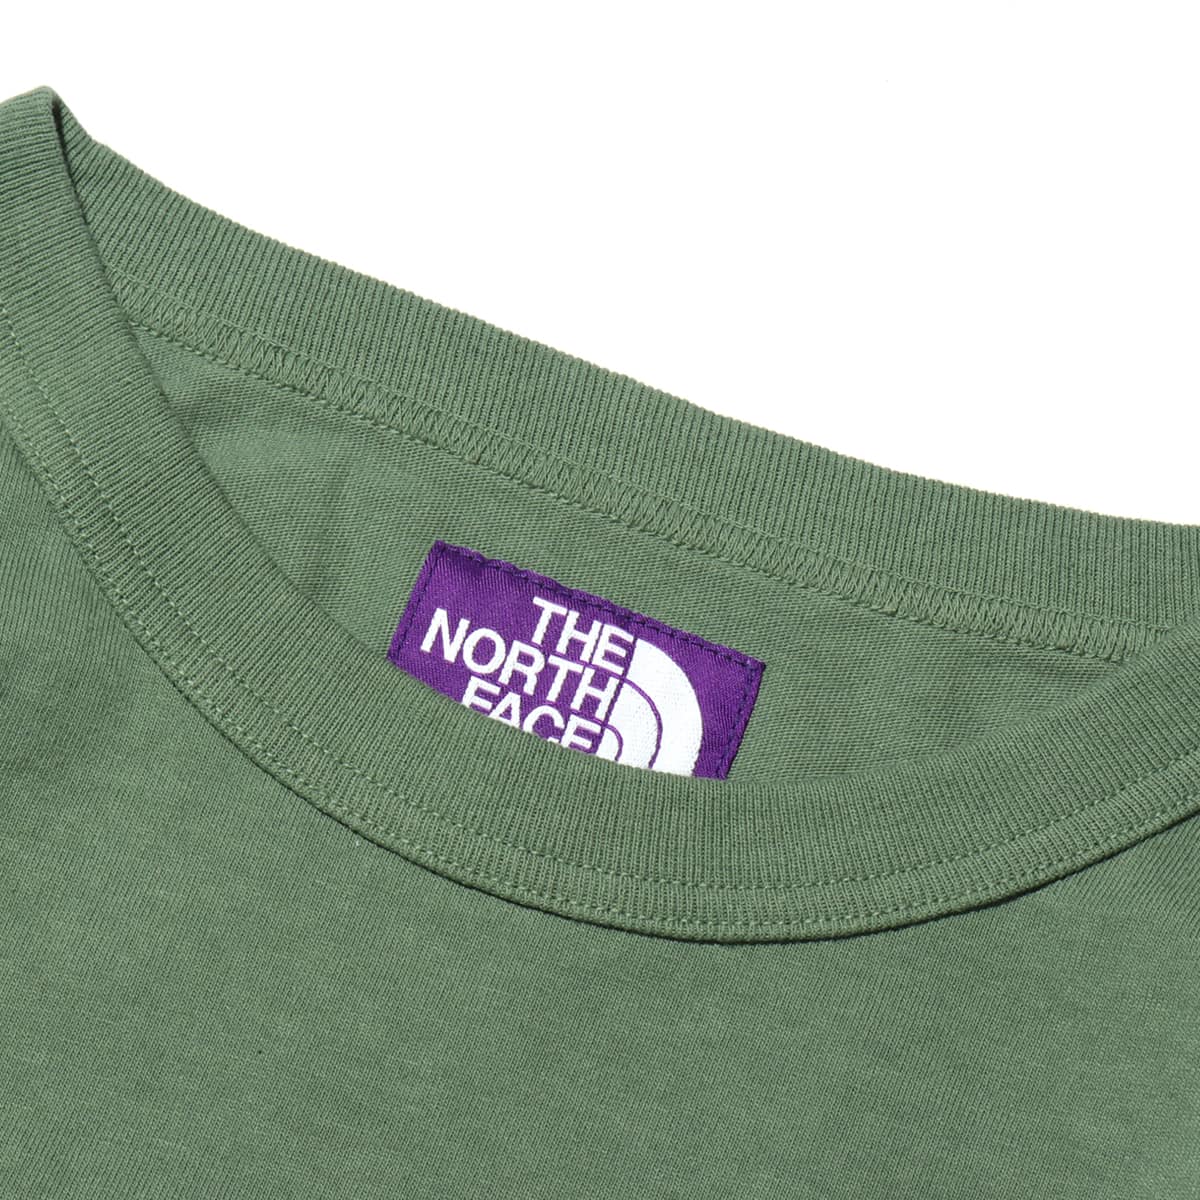 THE NORTH FACE PURPLE LABEL 7oz L/S Pocket Tee Grass Green 21SS-I